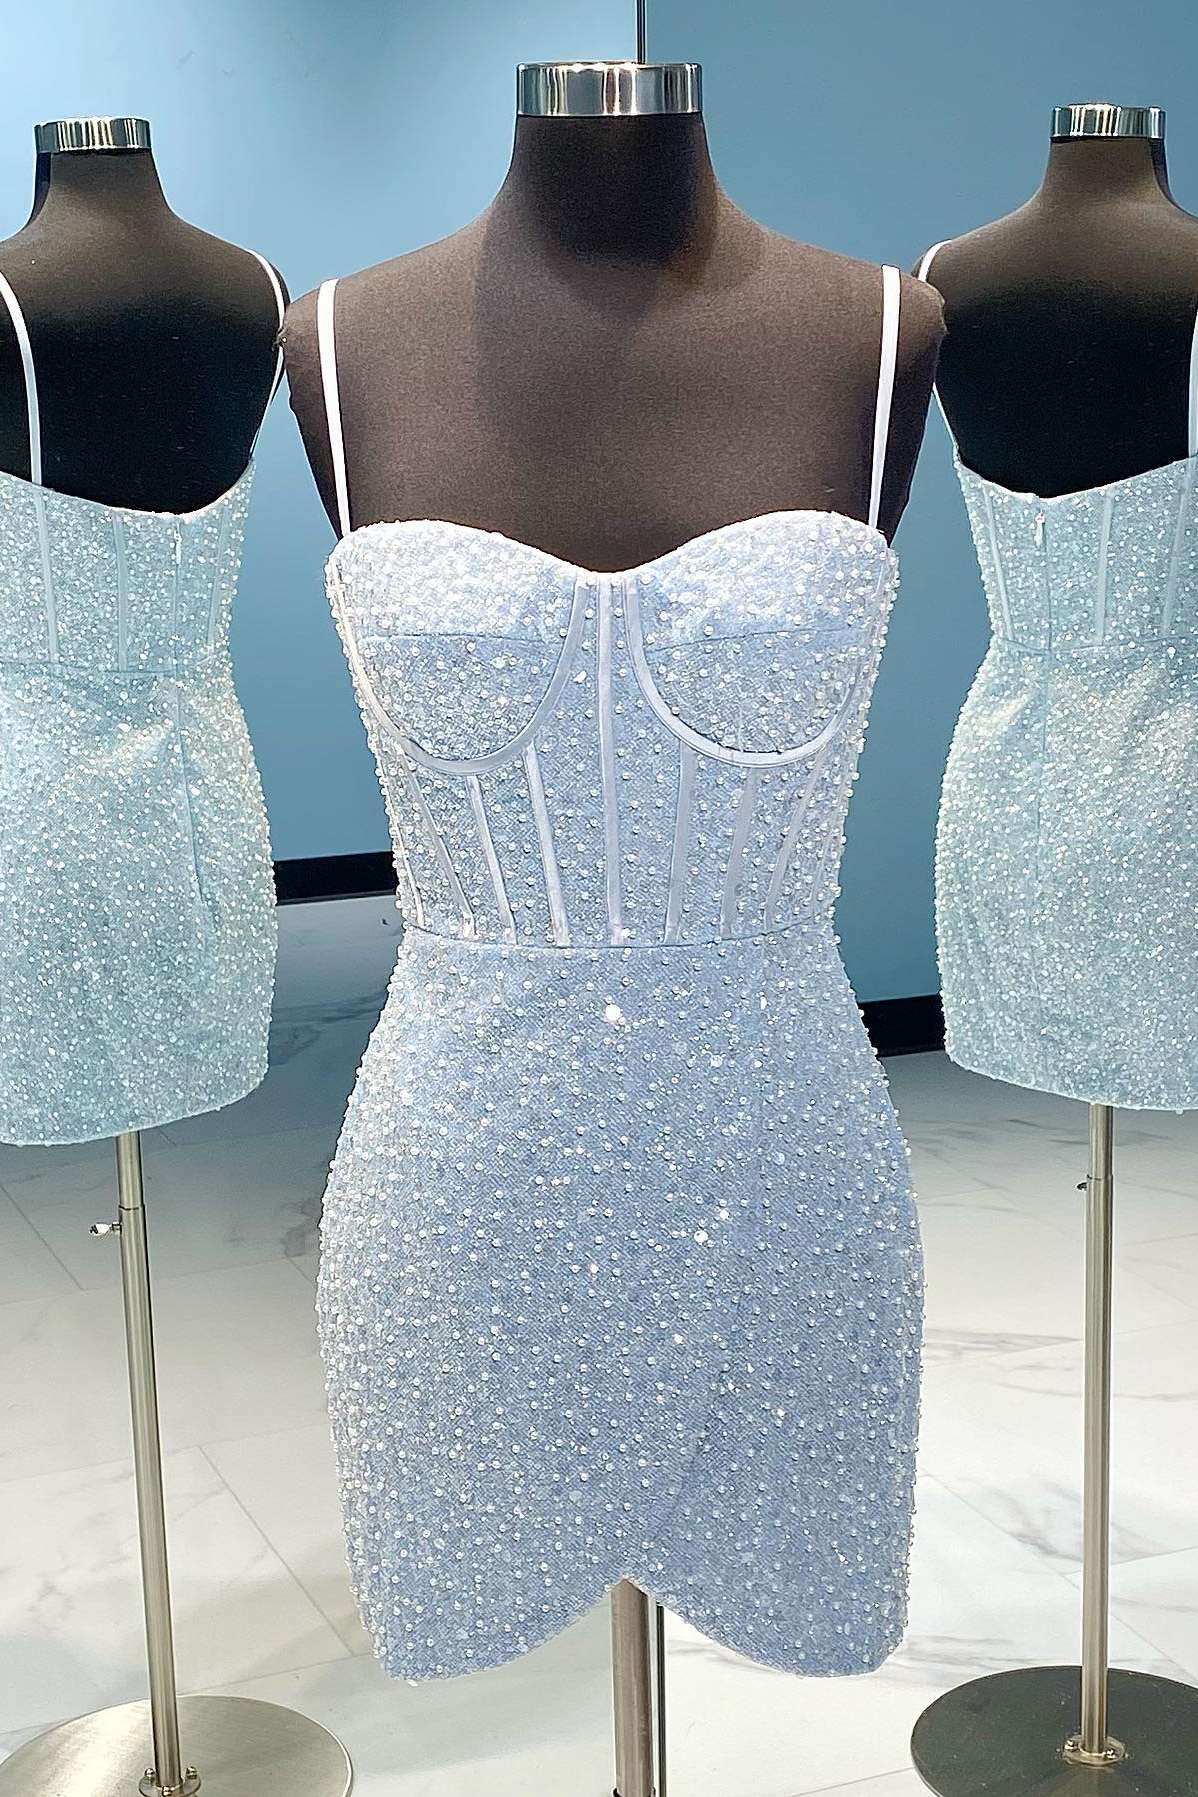 Homecomming Dresses Lace, Light Blue Sequin Straps Bodycon Short Homecoming Dress